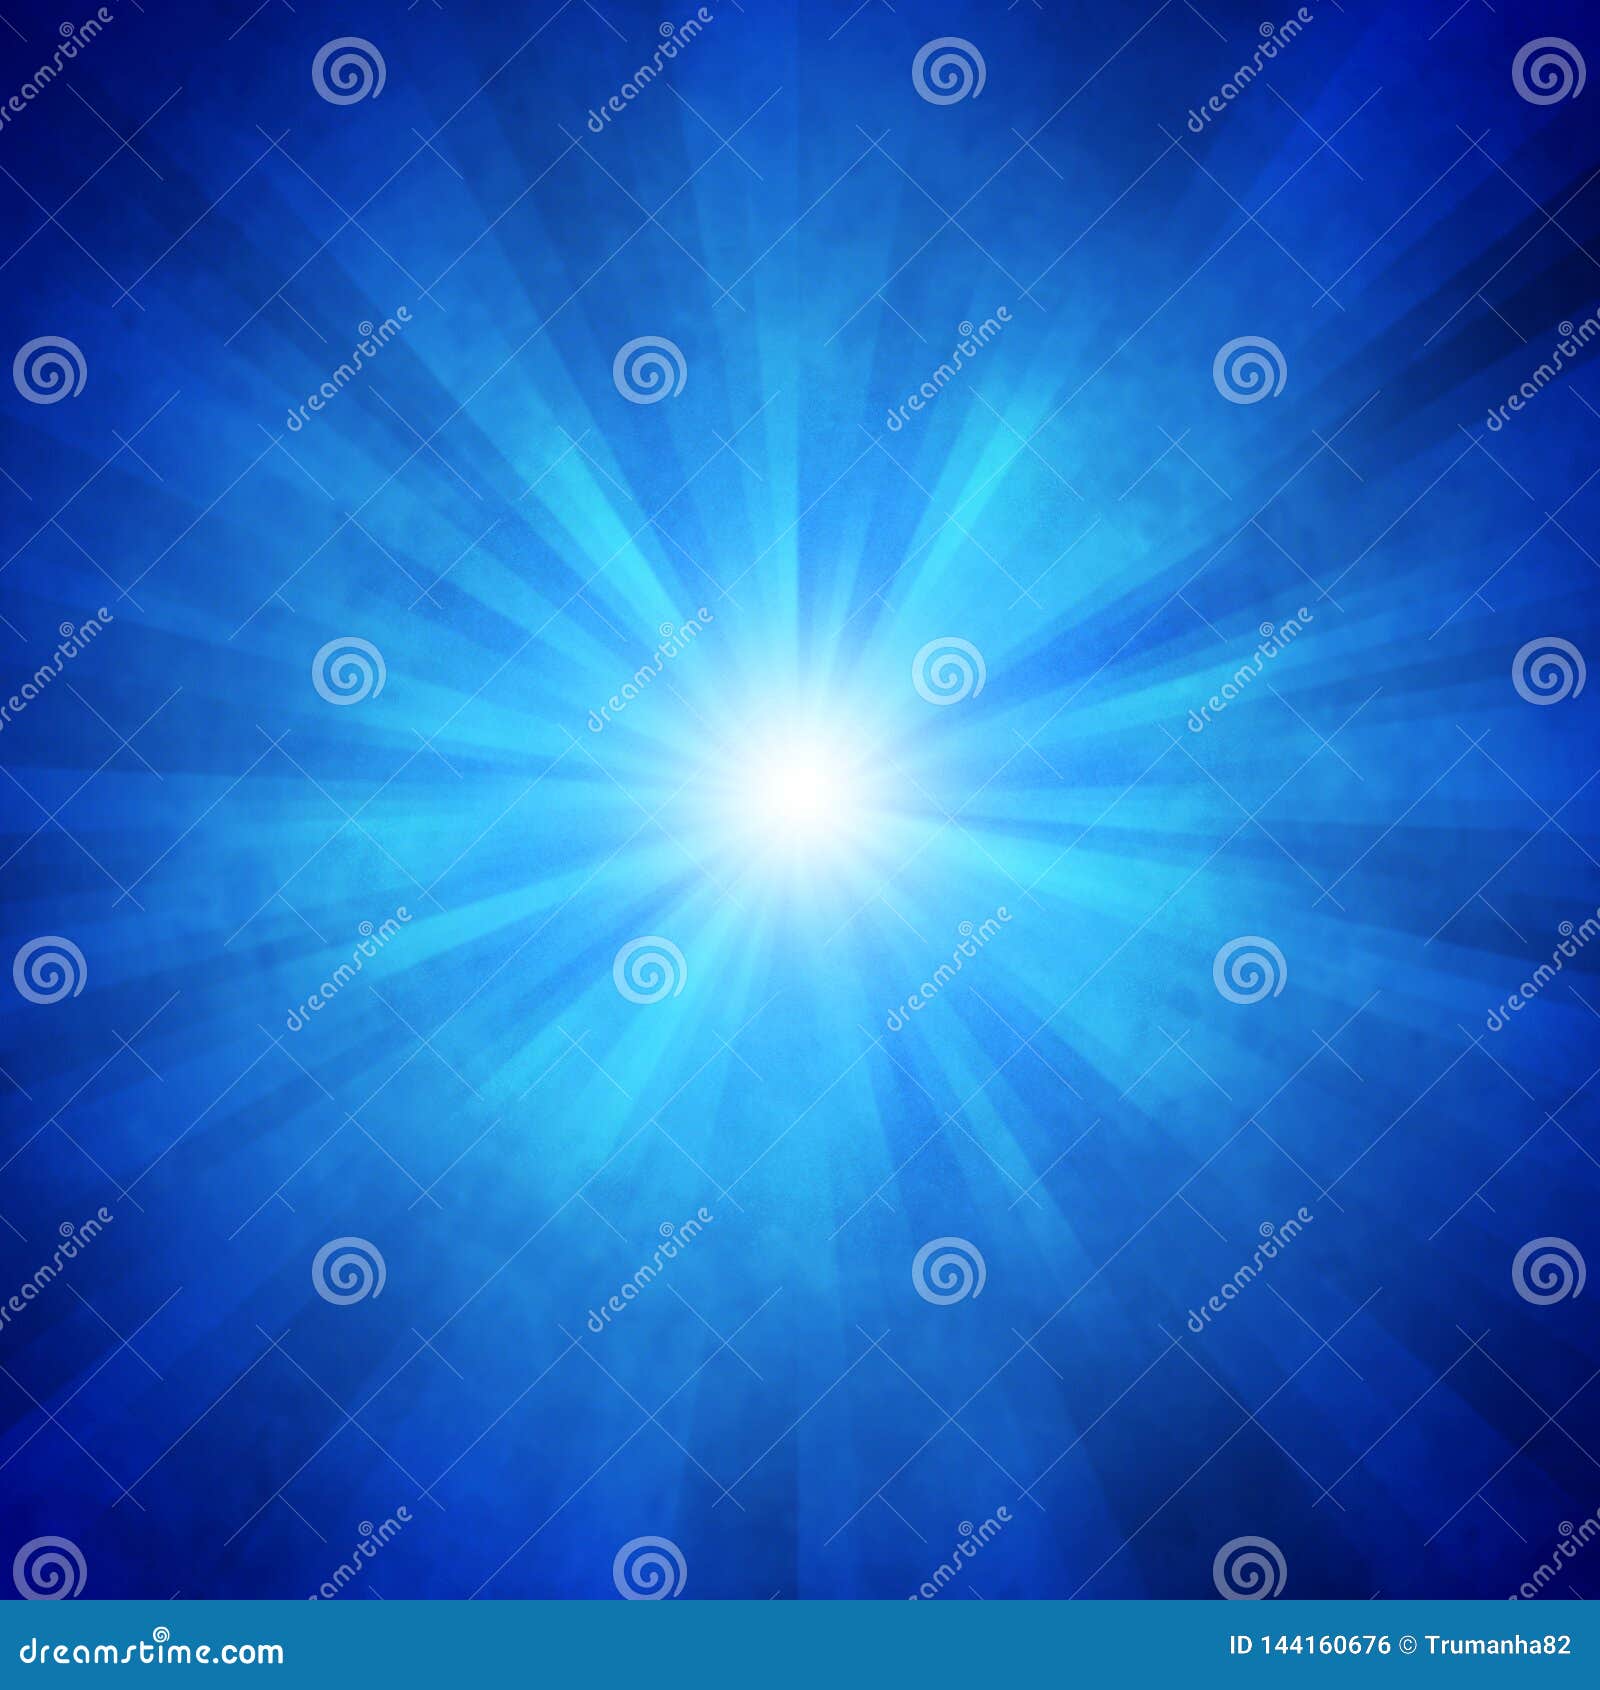 radial bright rays in blue background